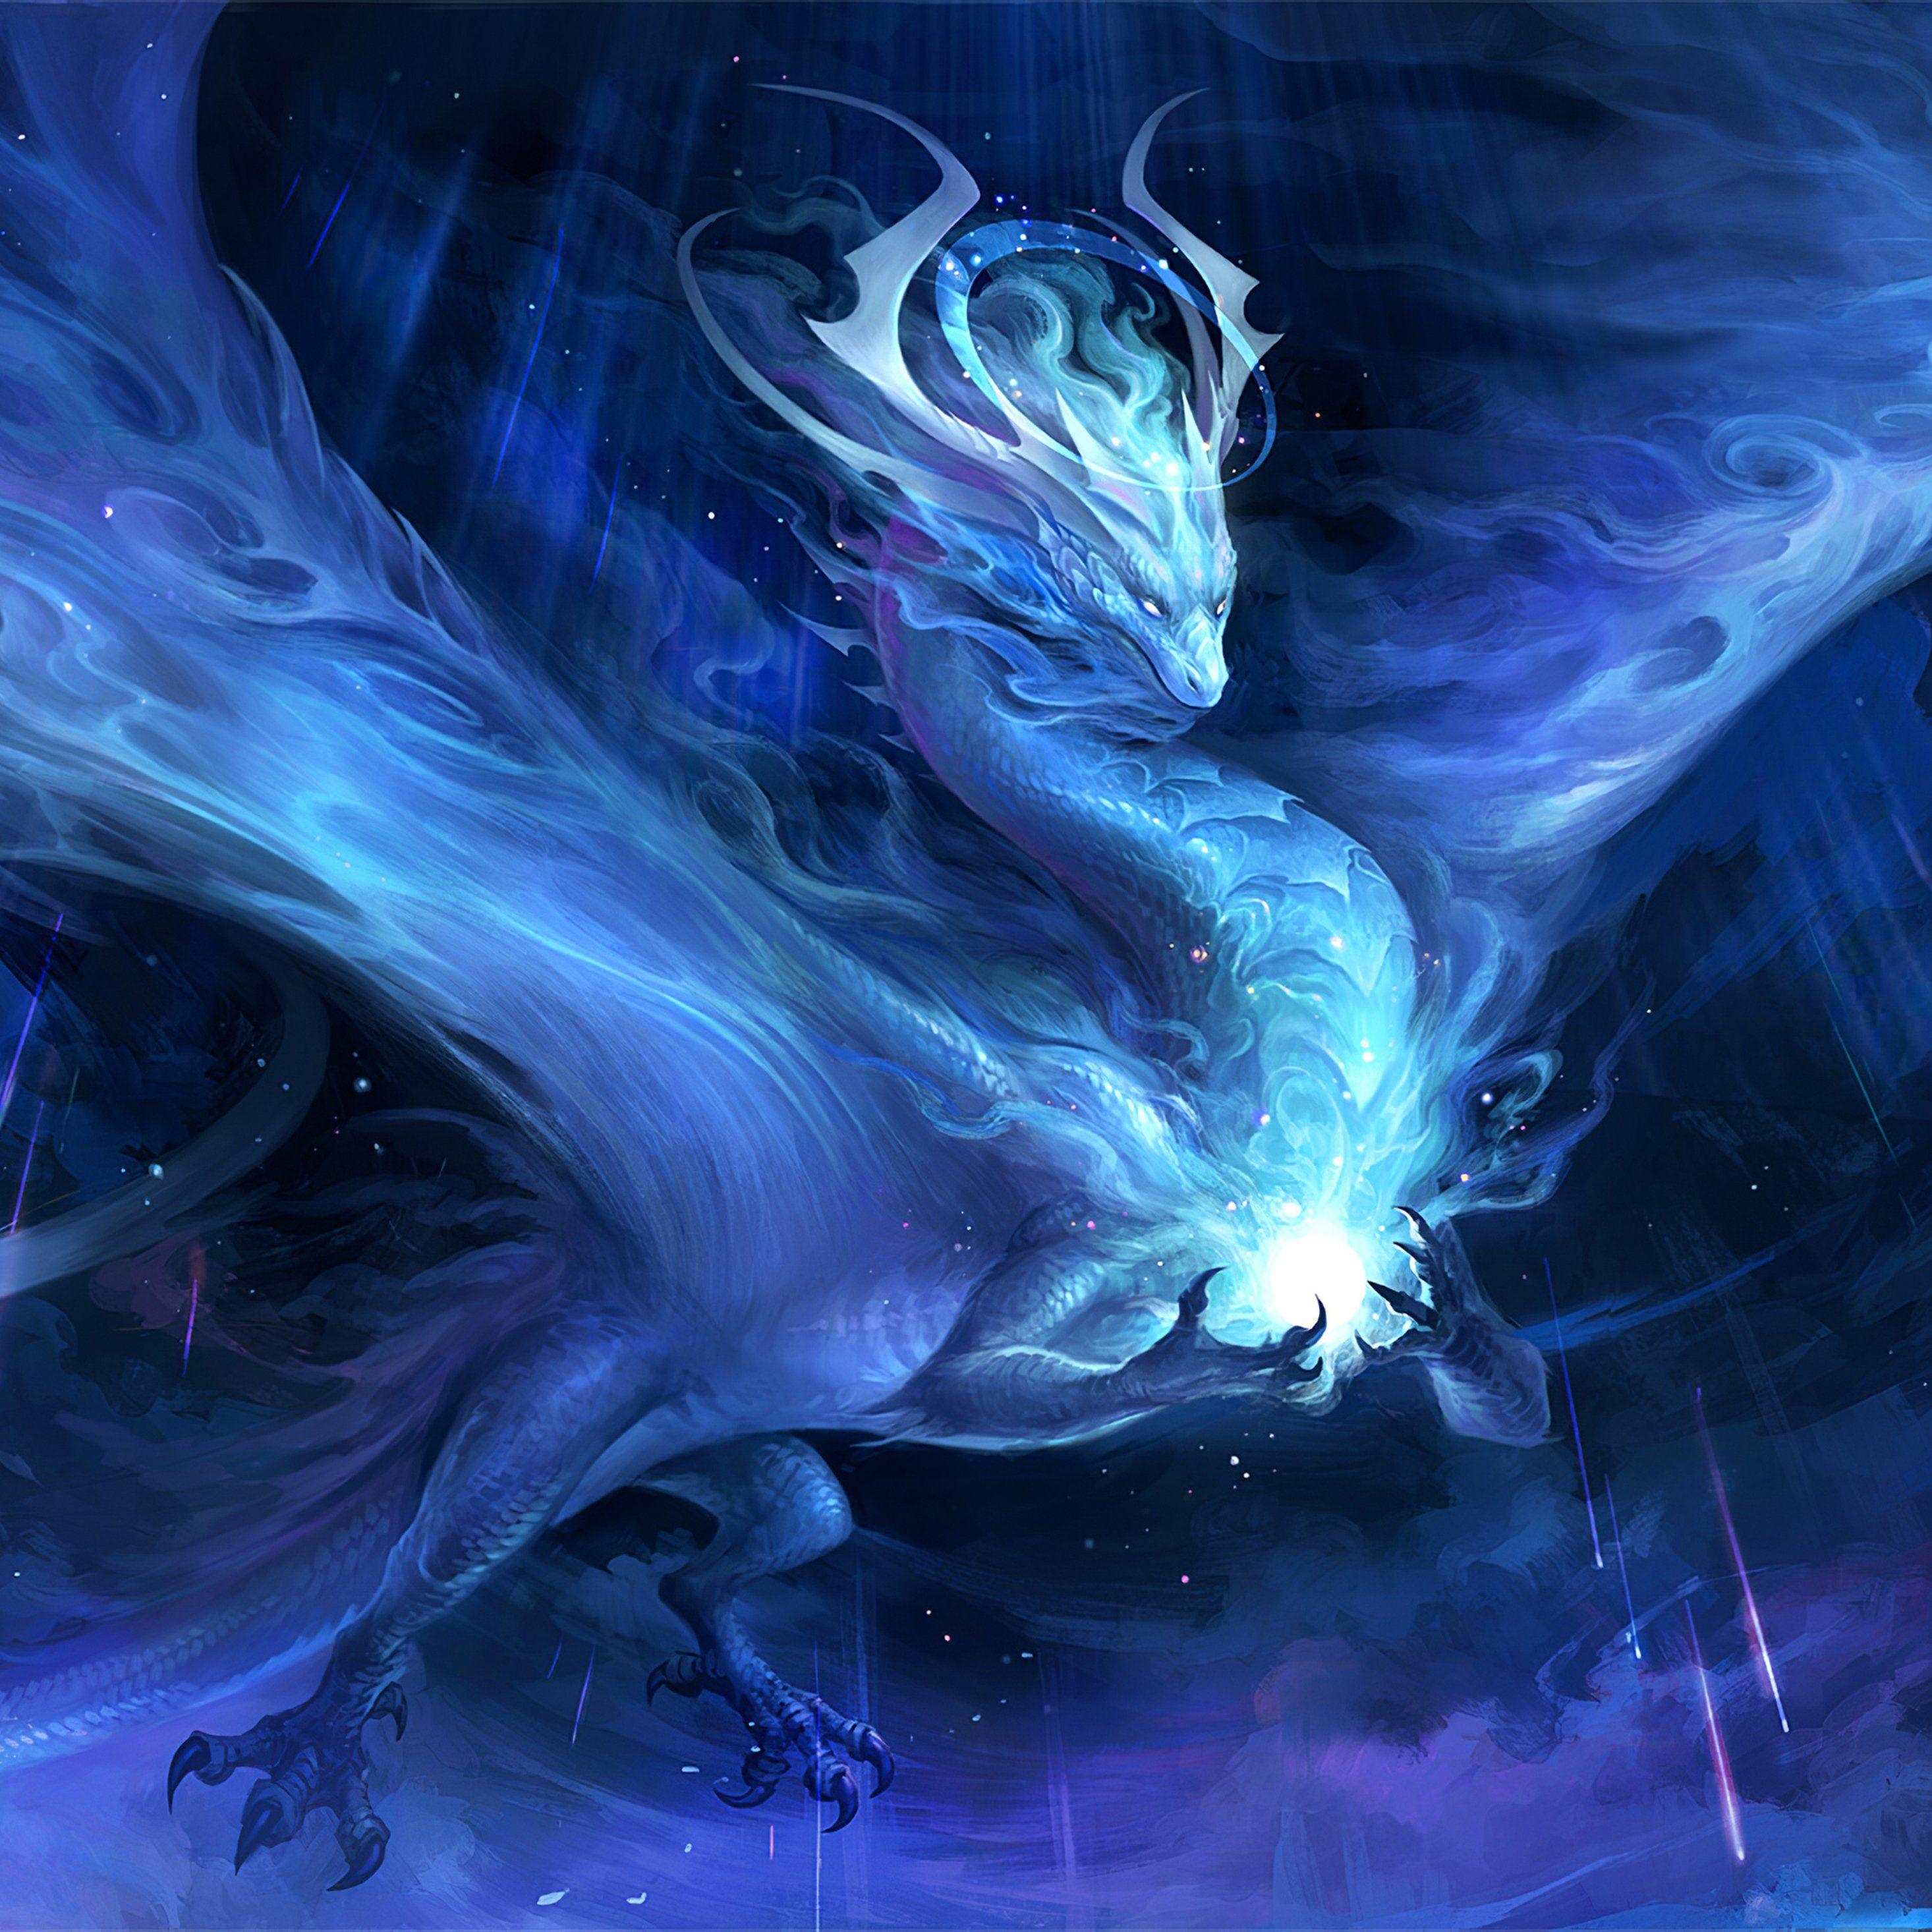 Majestic Dragon Wallpapers - Top Free Majestic Dragon Backgrounds ...